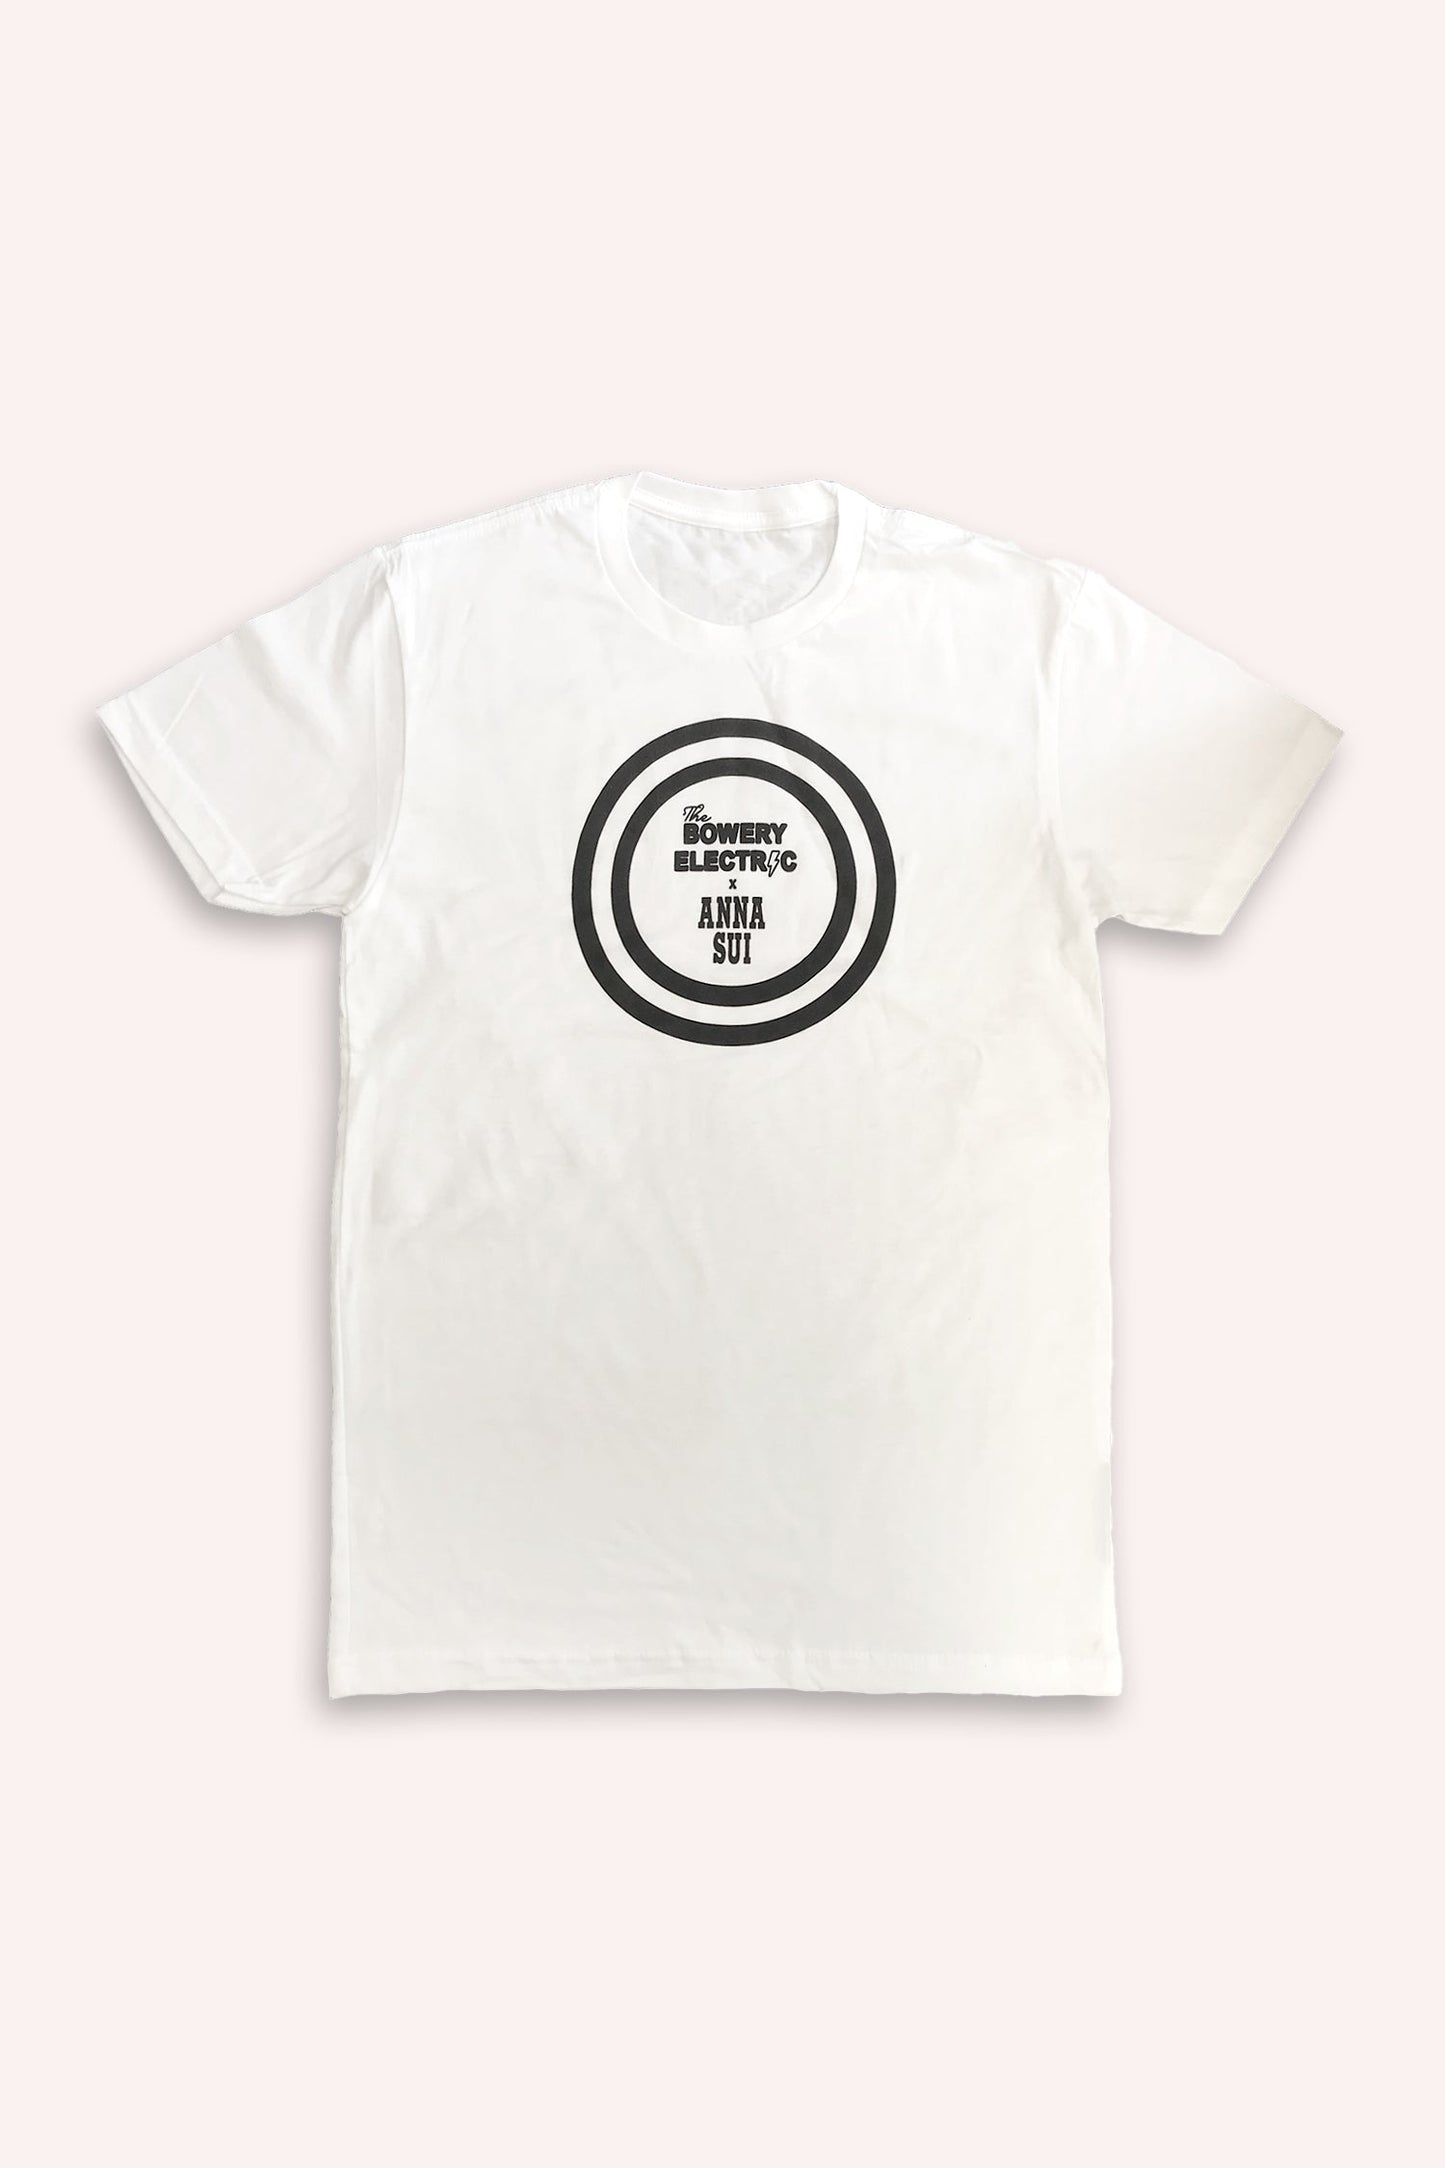 Limited-Edition Tee, short sleeves, white, black round logo of Anna Sui and Bowery Electric labels